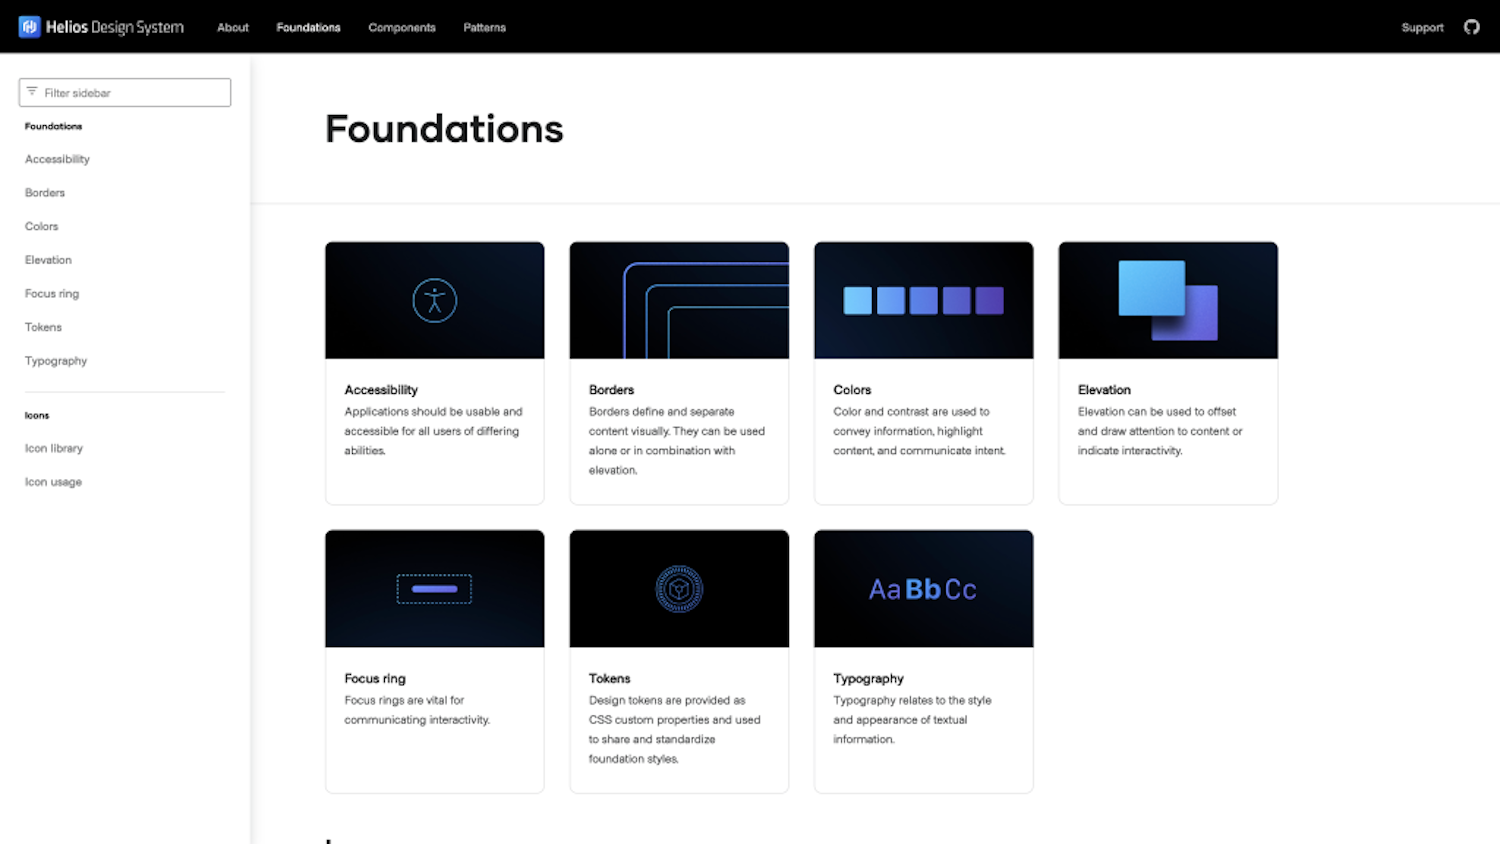 A screen shot of the Helios design system homepage